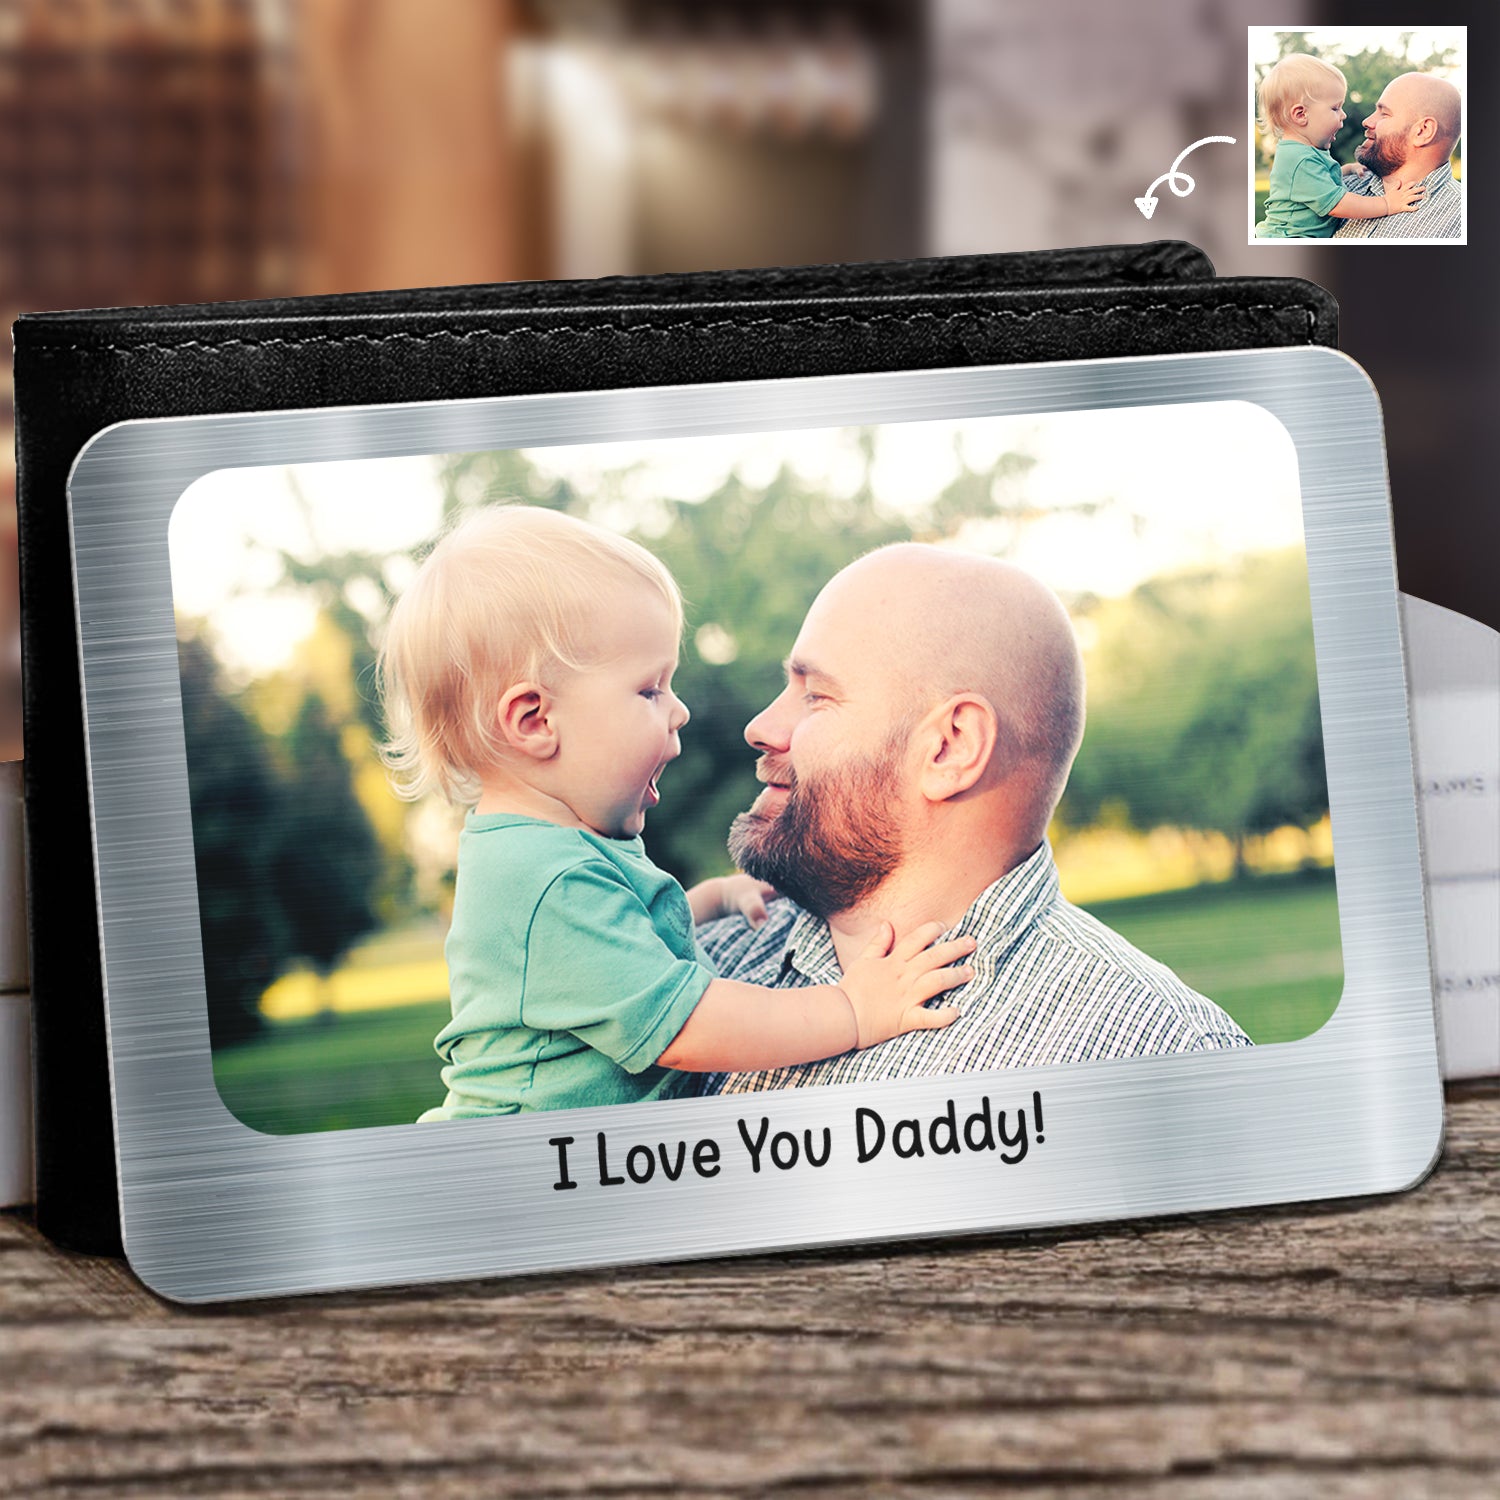 Custom Photo Horizontal - Gift For Dad, Mom, Family, Siblings, Friends, Couples - Personalized Aluminum Wallet Card